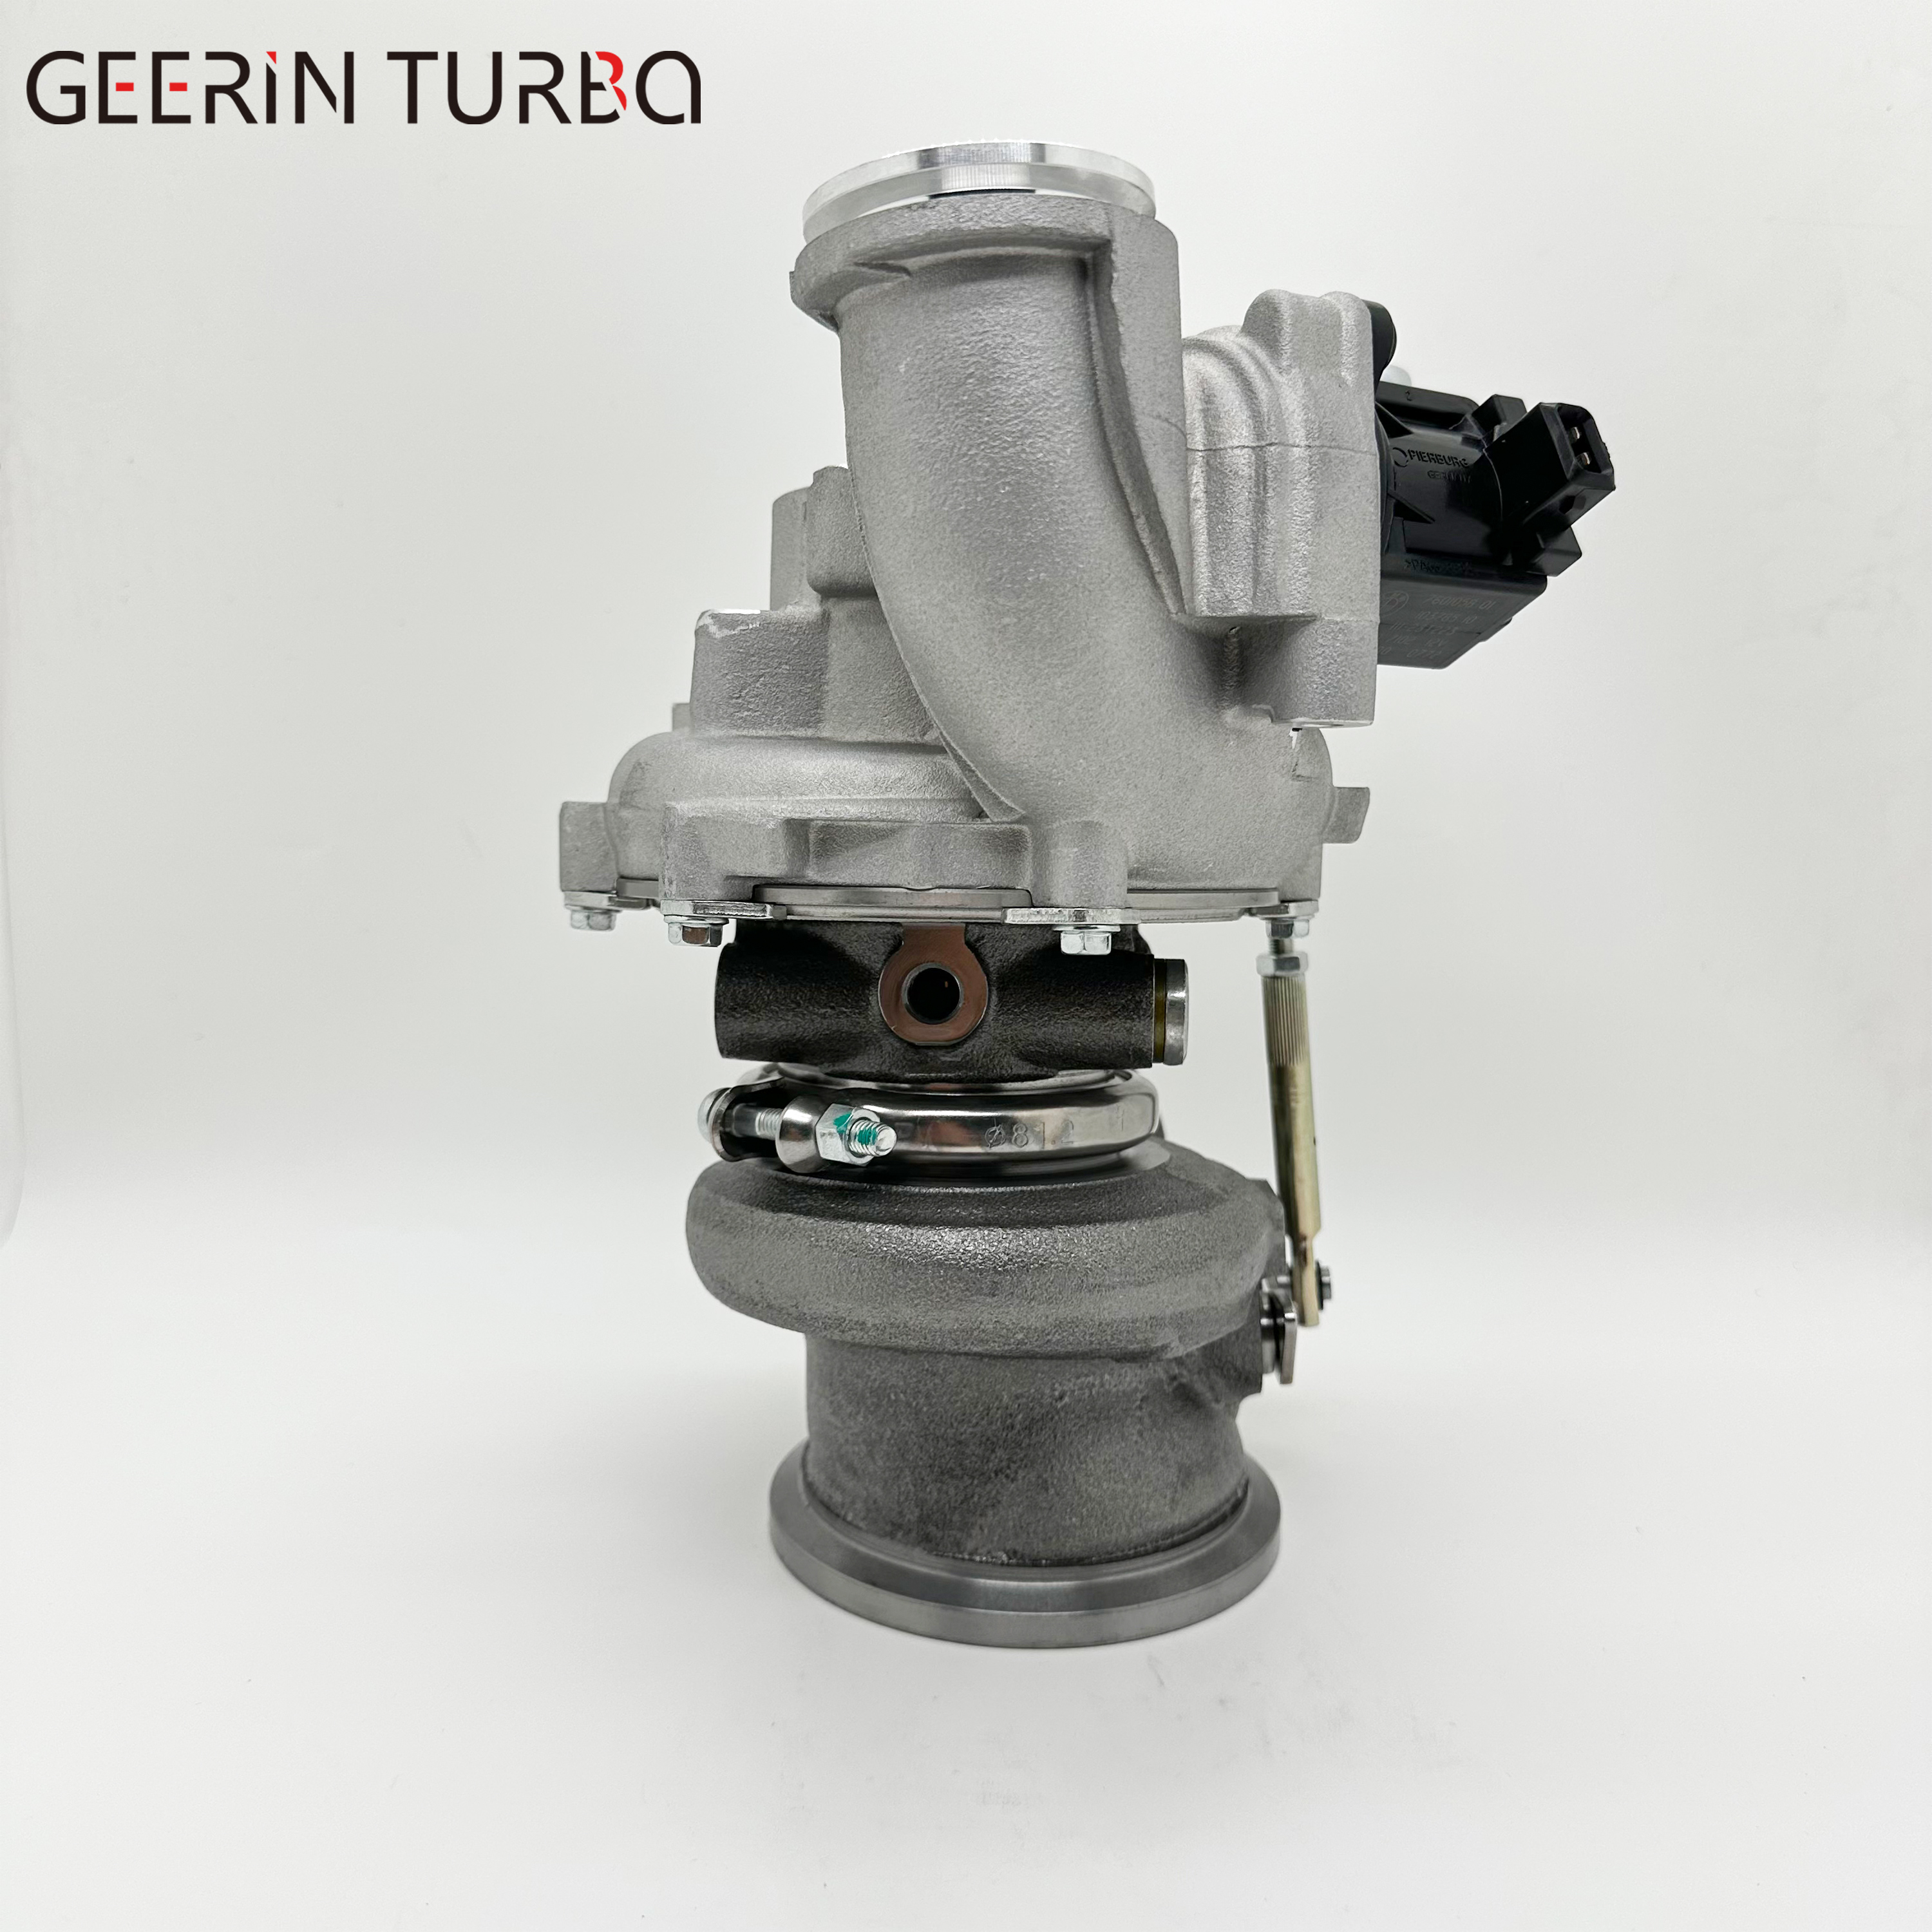 Turbocharger Manufacture MGT2256S 769155-5015S 793647-5009S 821719-5002S 821719-5003S Full Turbo Assy For BMW 4.4 X6 Factory